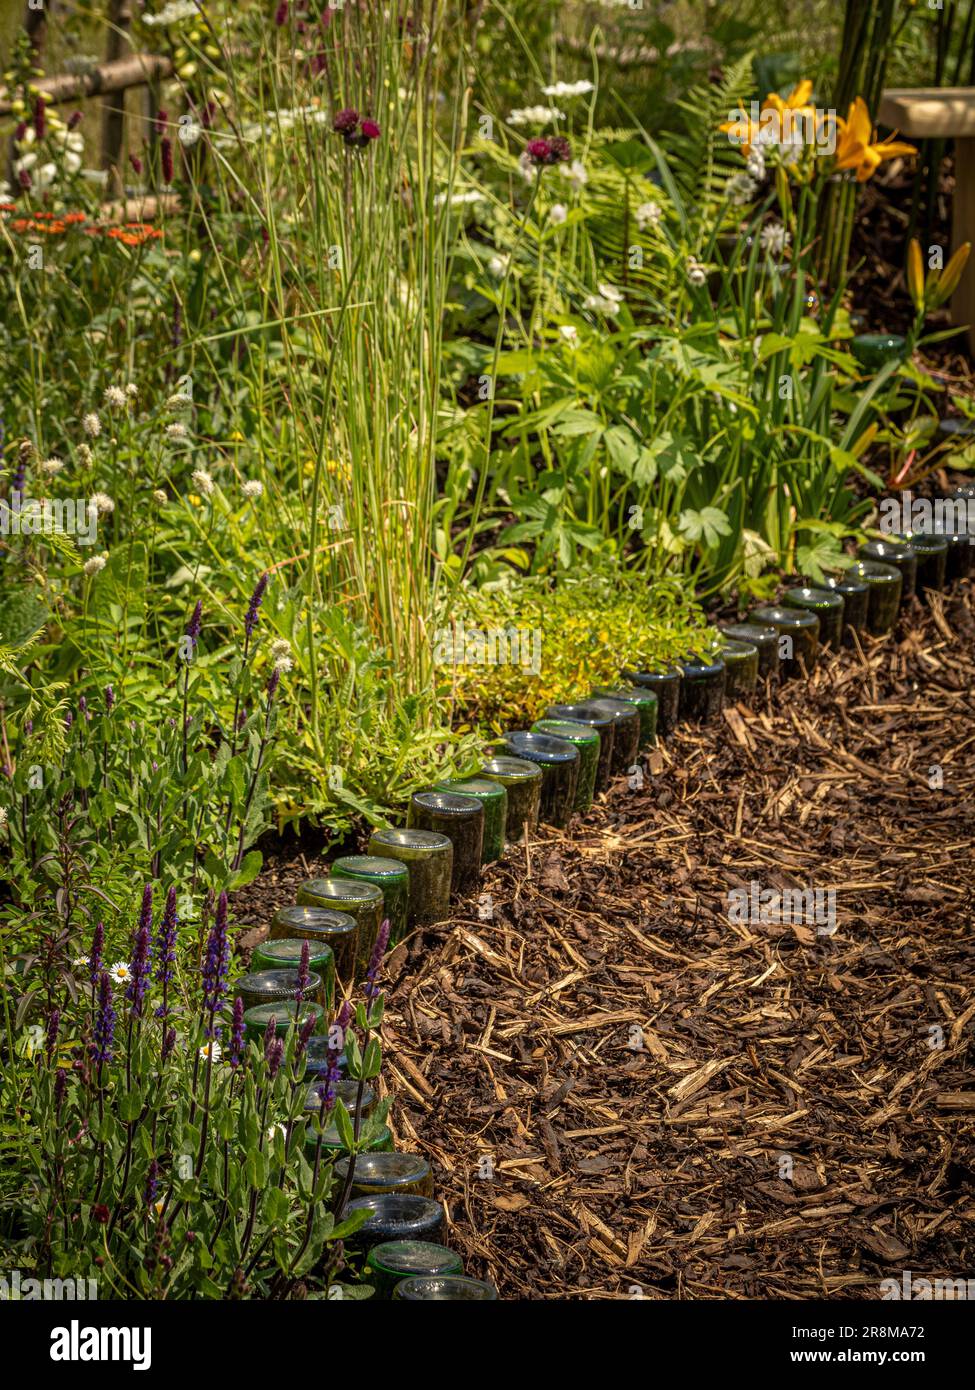 Bark chipping garden path edged with recycled wine bottles in a UK garden. Stock Photo